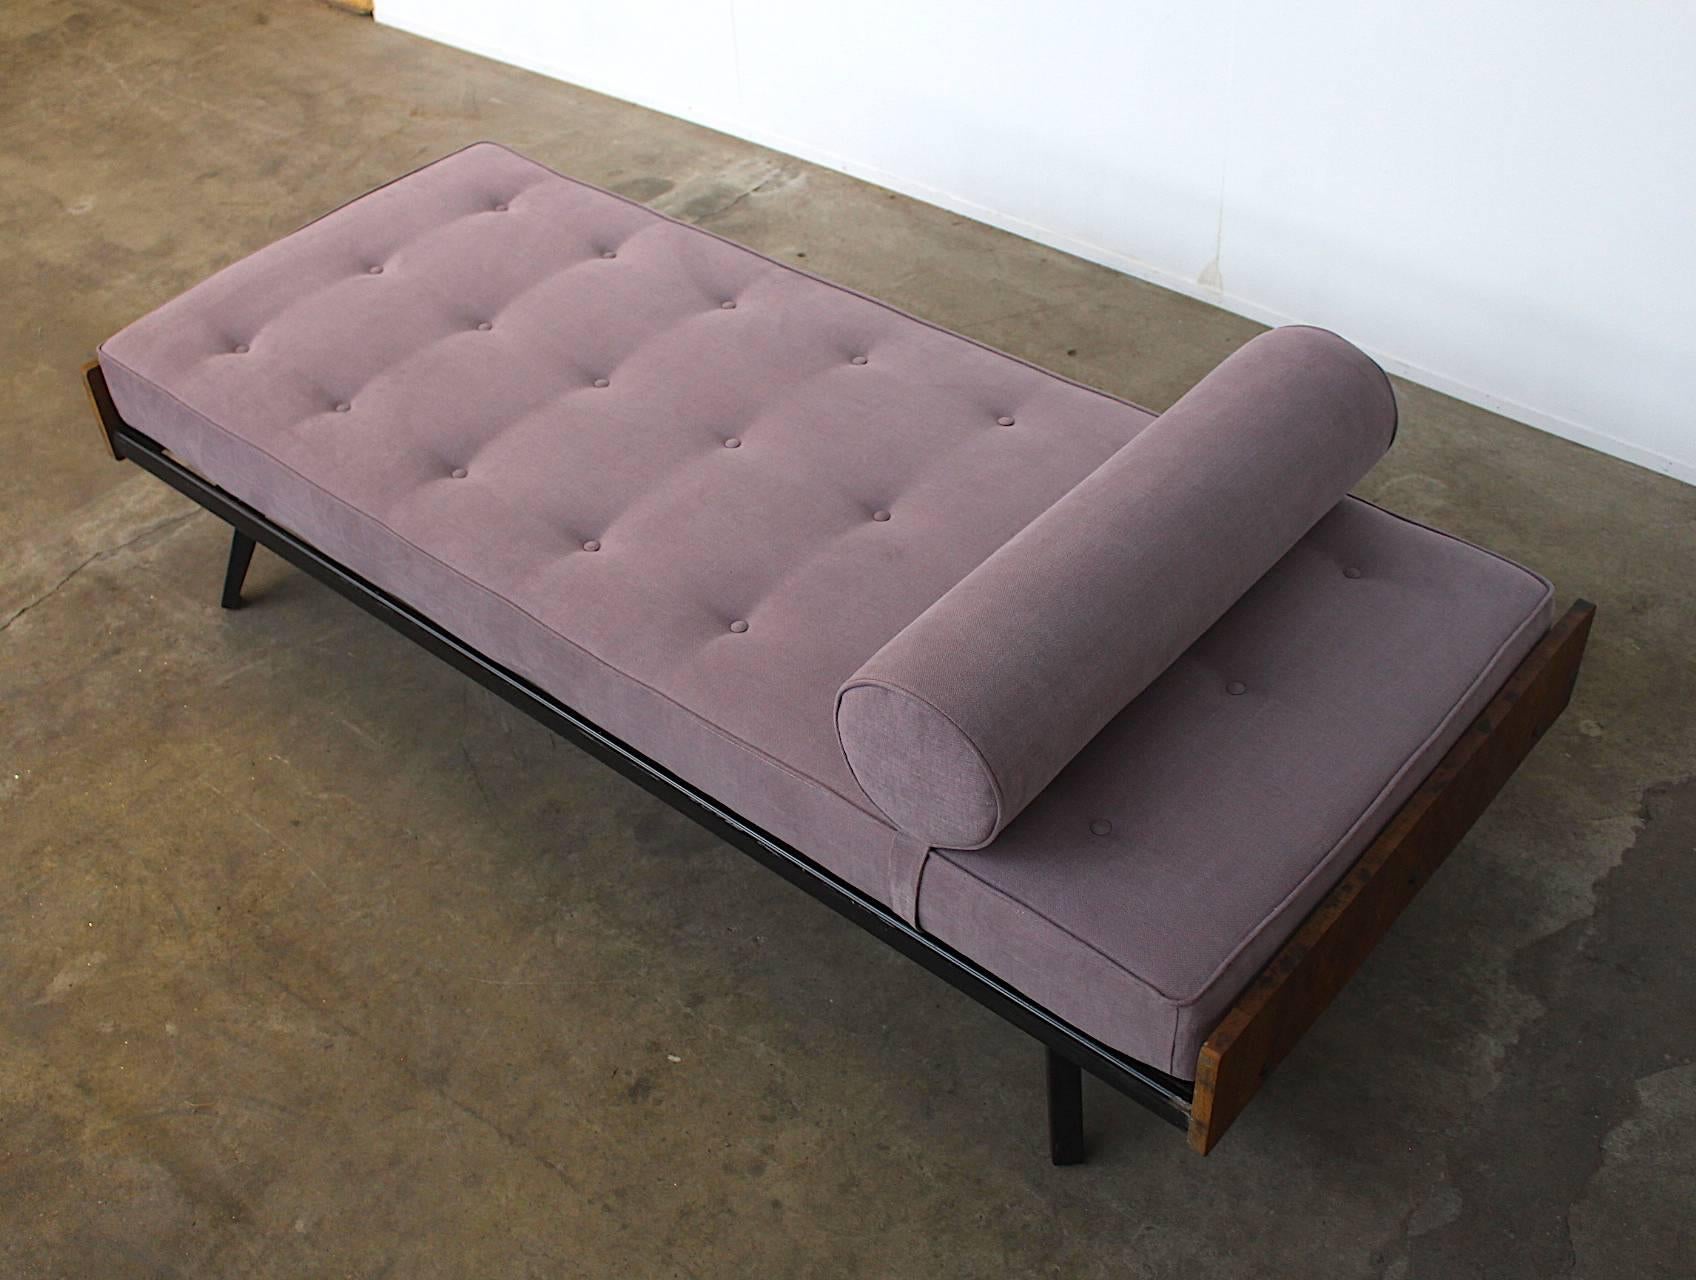 French daybed from the 1950s in the style of Jean Prouvé.
This daybed is very similar to the SCAL daybed from Atelier Prouvé.
Black enameled steel frame with solid wood ends.
The mattress and cushion are newly upholstered with the best quality